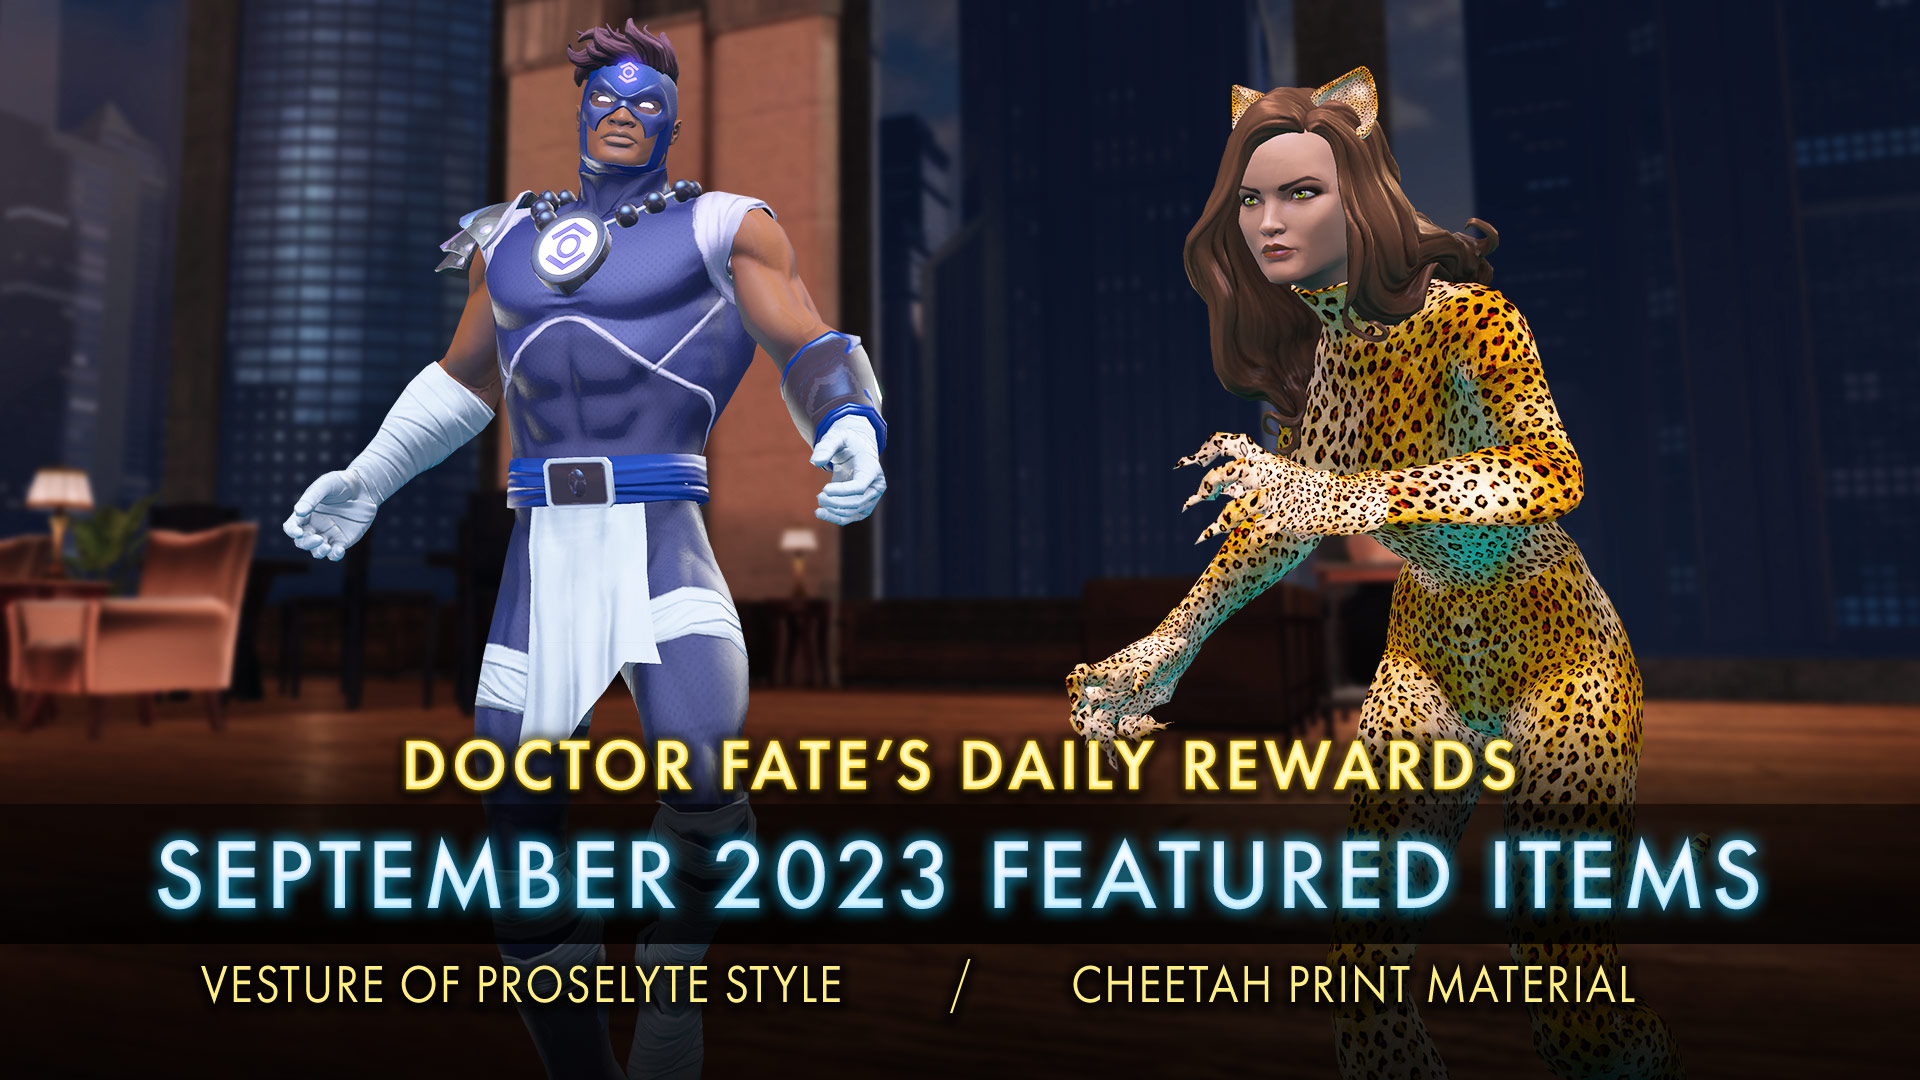 Doctor Fate's Daily Rewards - September 2023